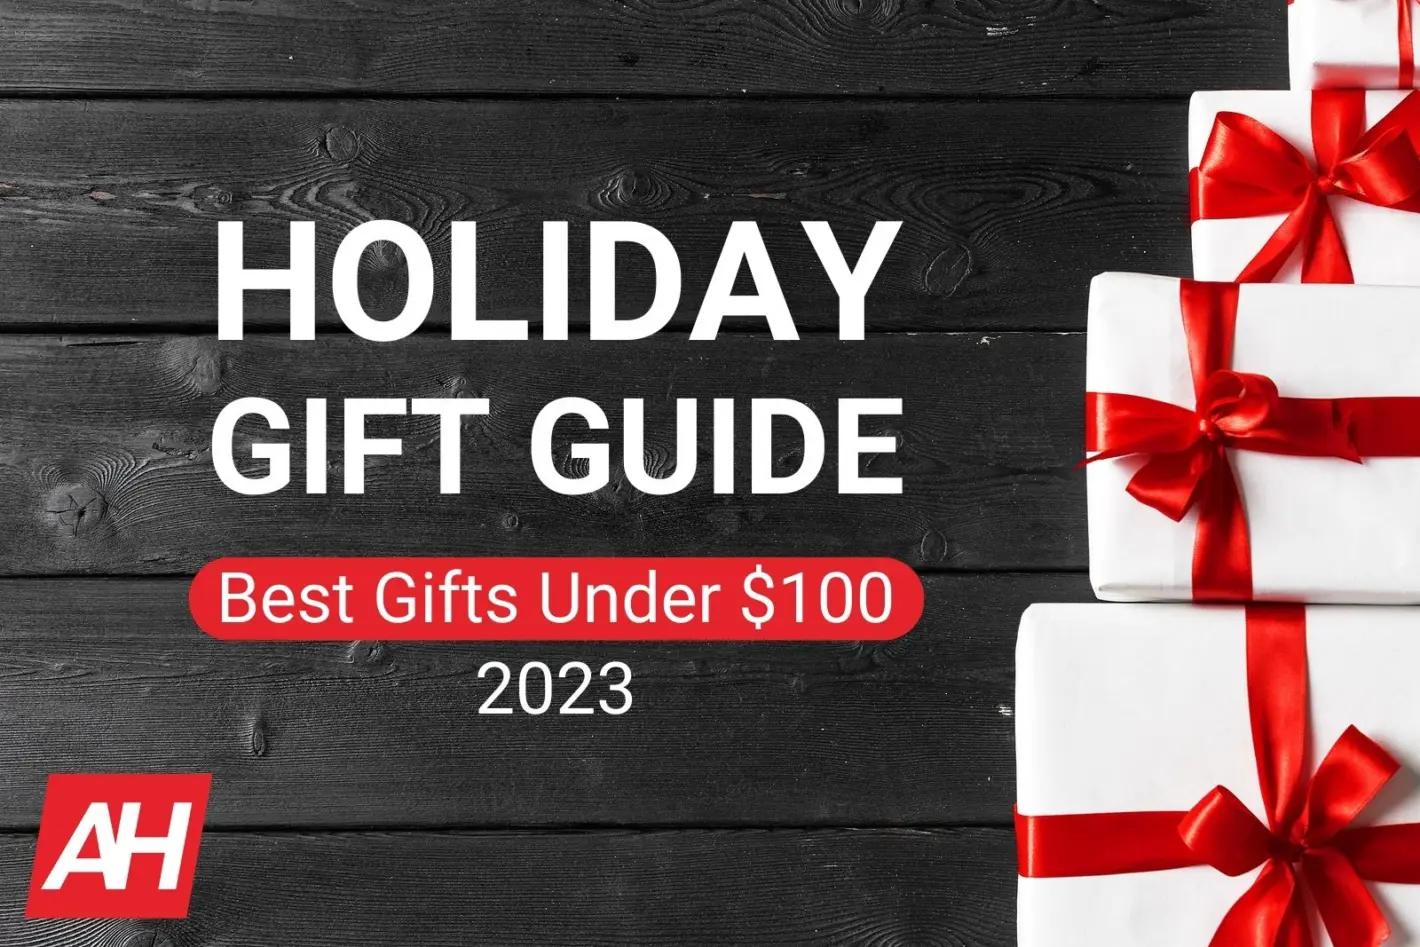 Featured image for Holiday Gift Guide 2023: Best Gifts Under $100